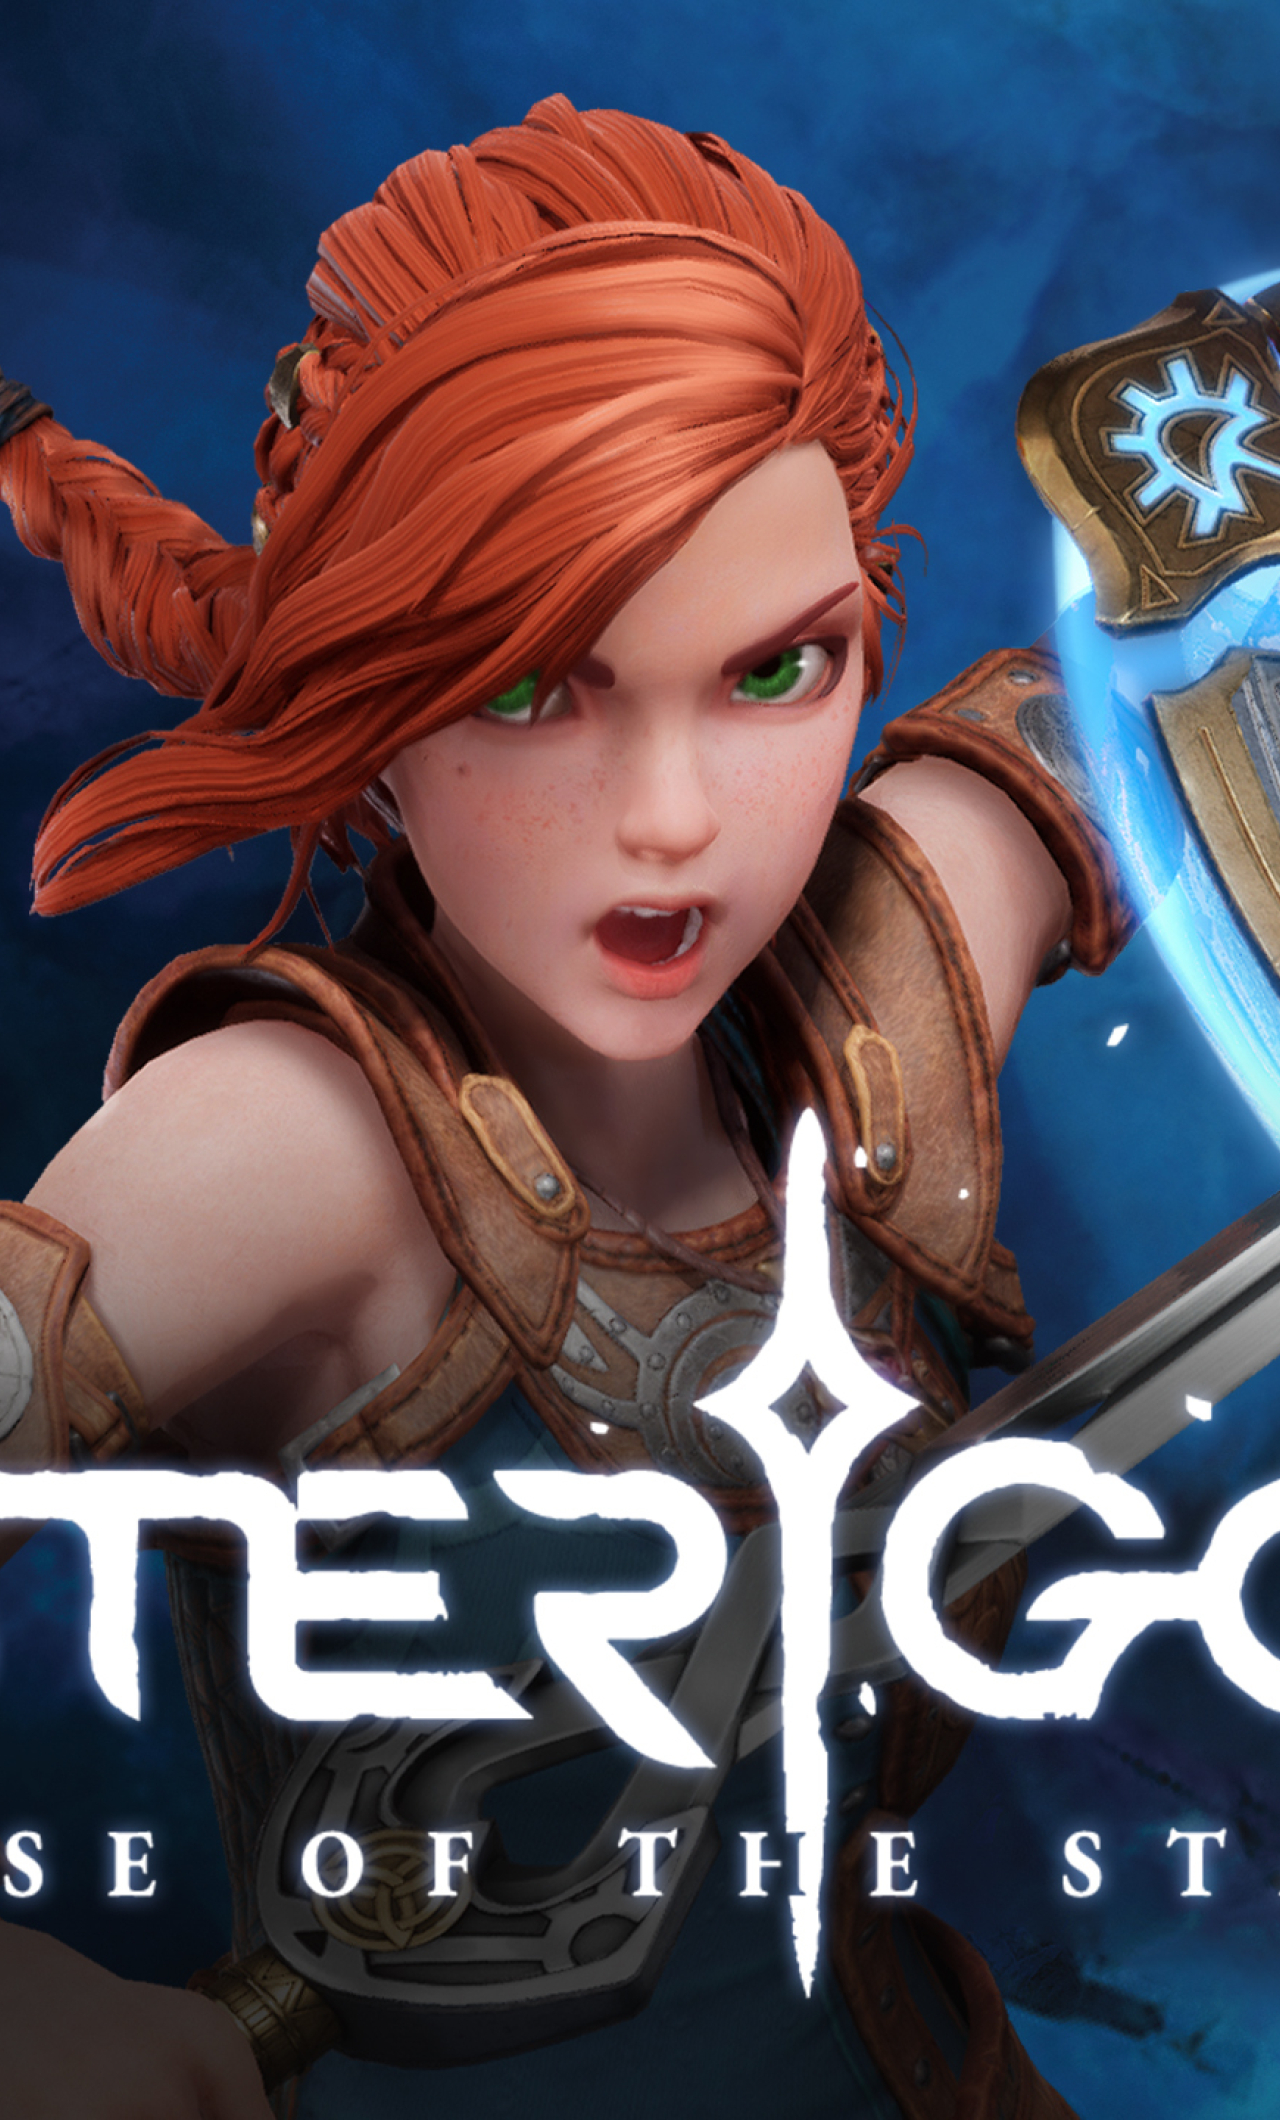 download the last version for iphoneAsterigos: Curse of the Stars